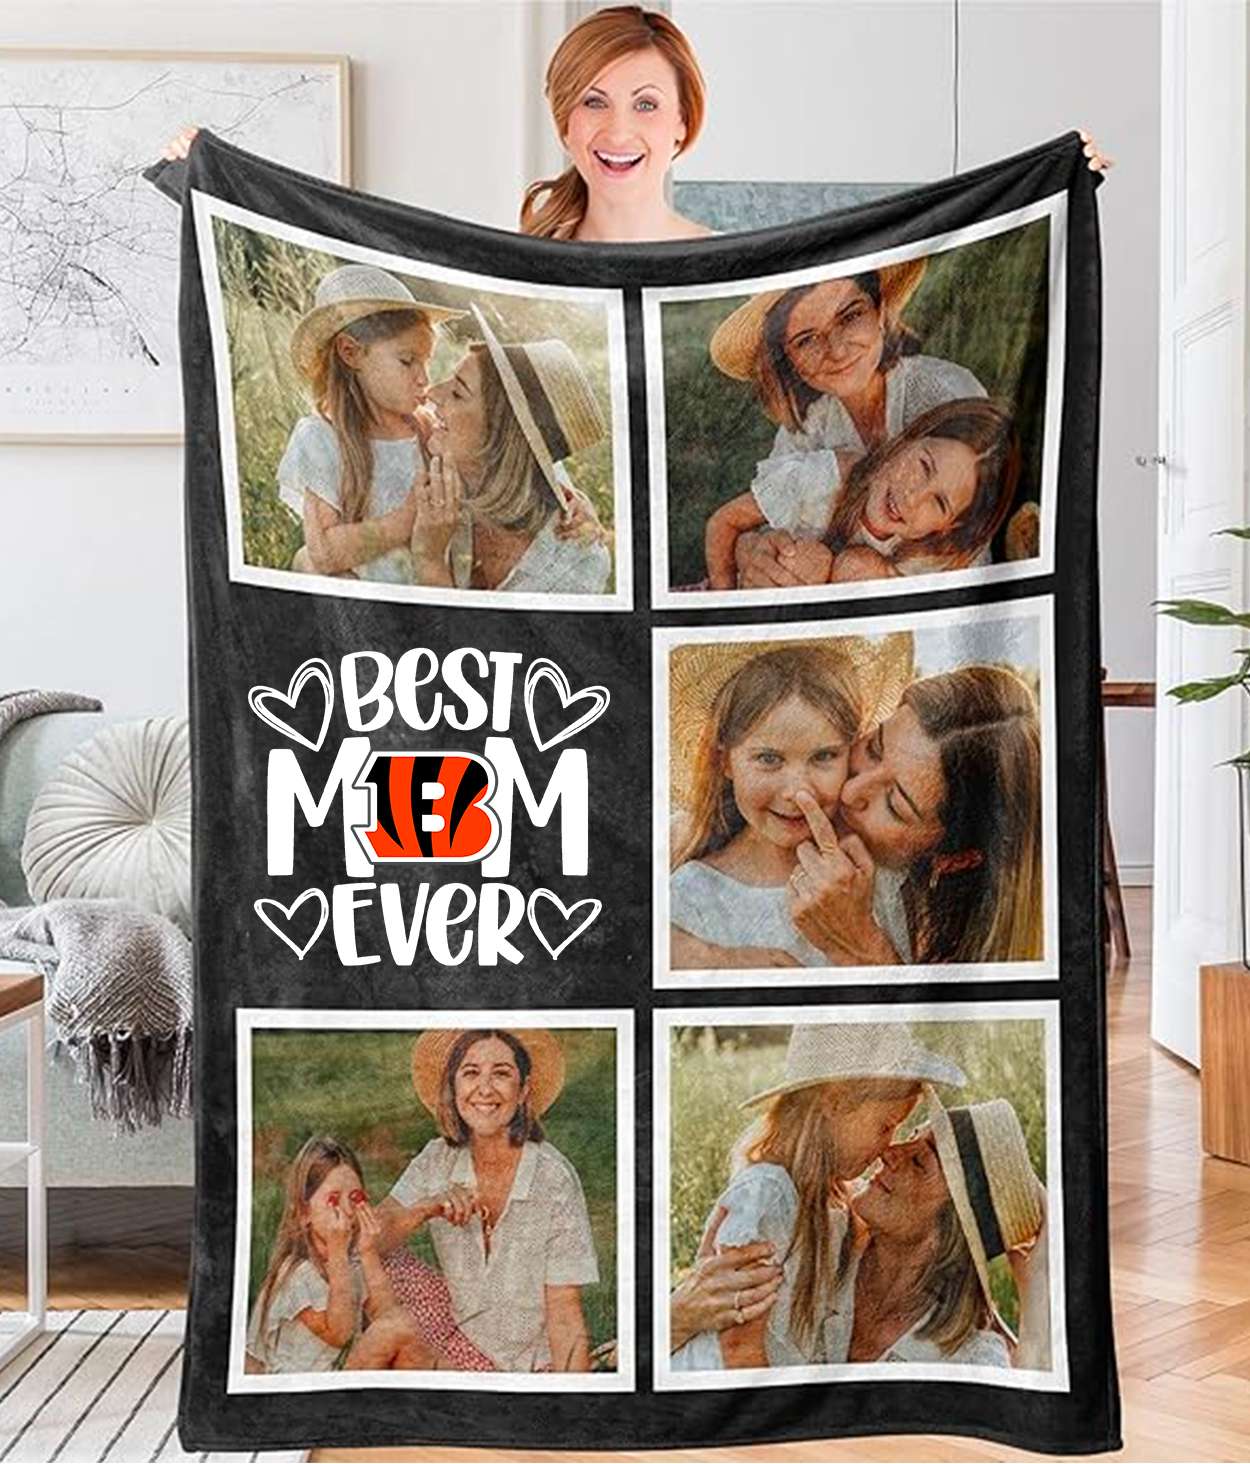 Best Mom Ever - Custom NFL Cincinnati Bengals Blankets with Pictures for Mother's Day Gift